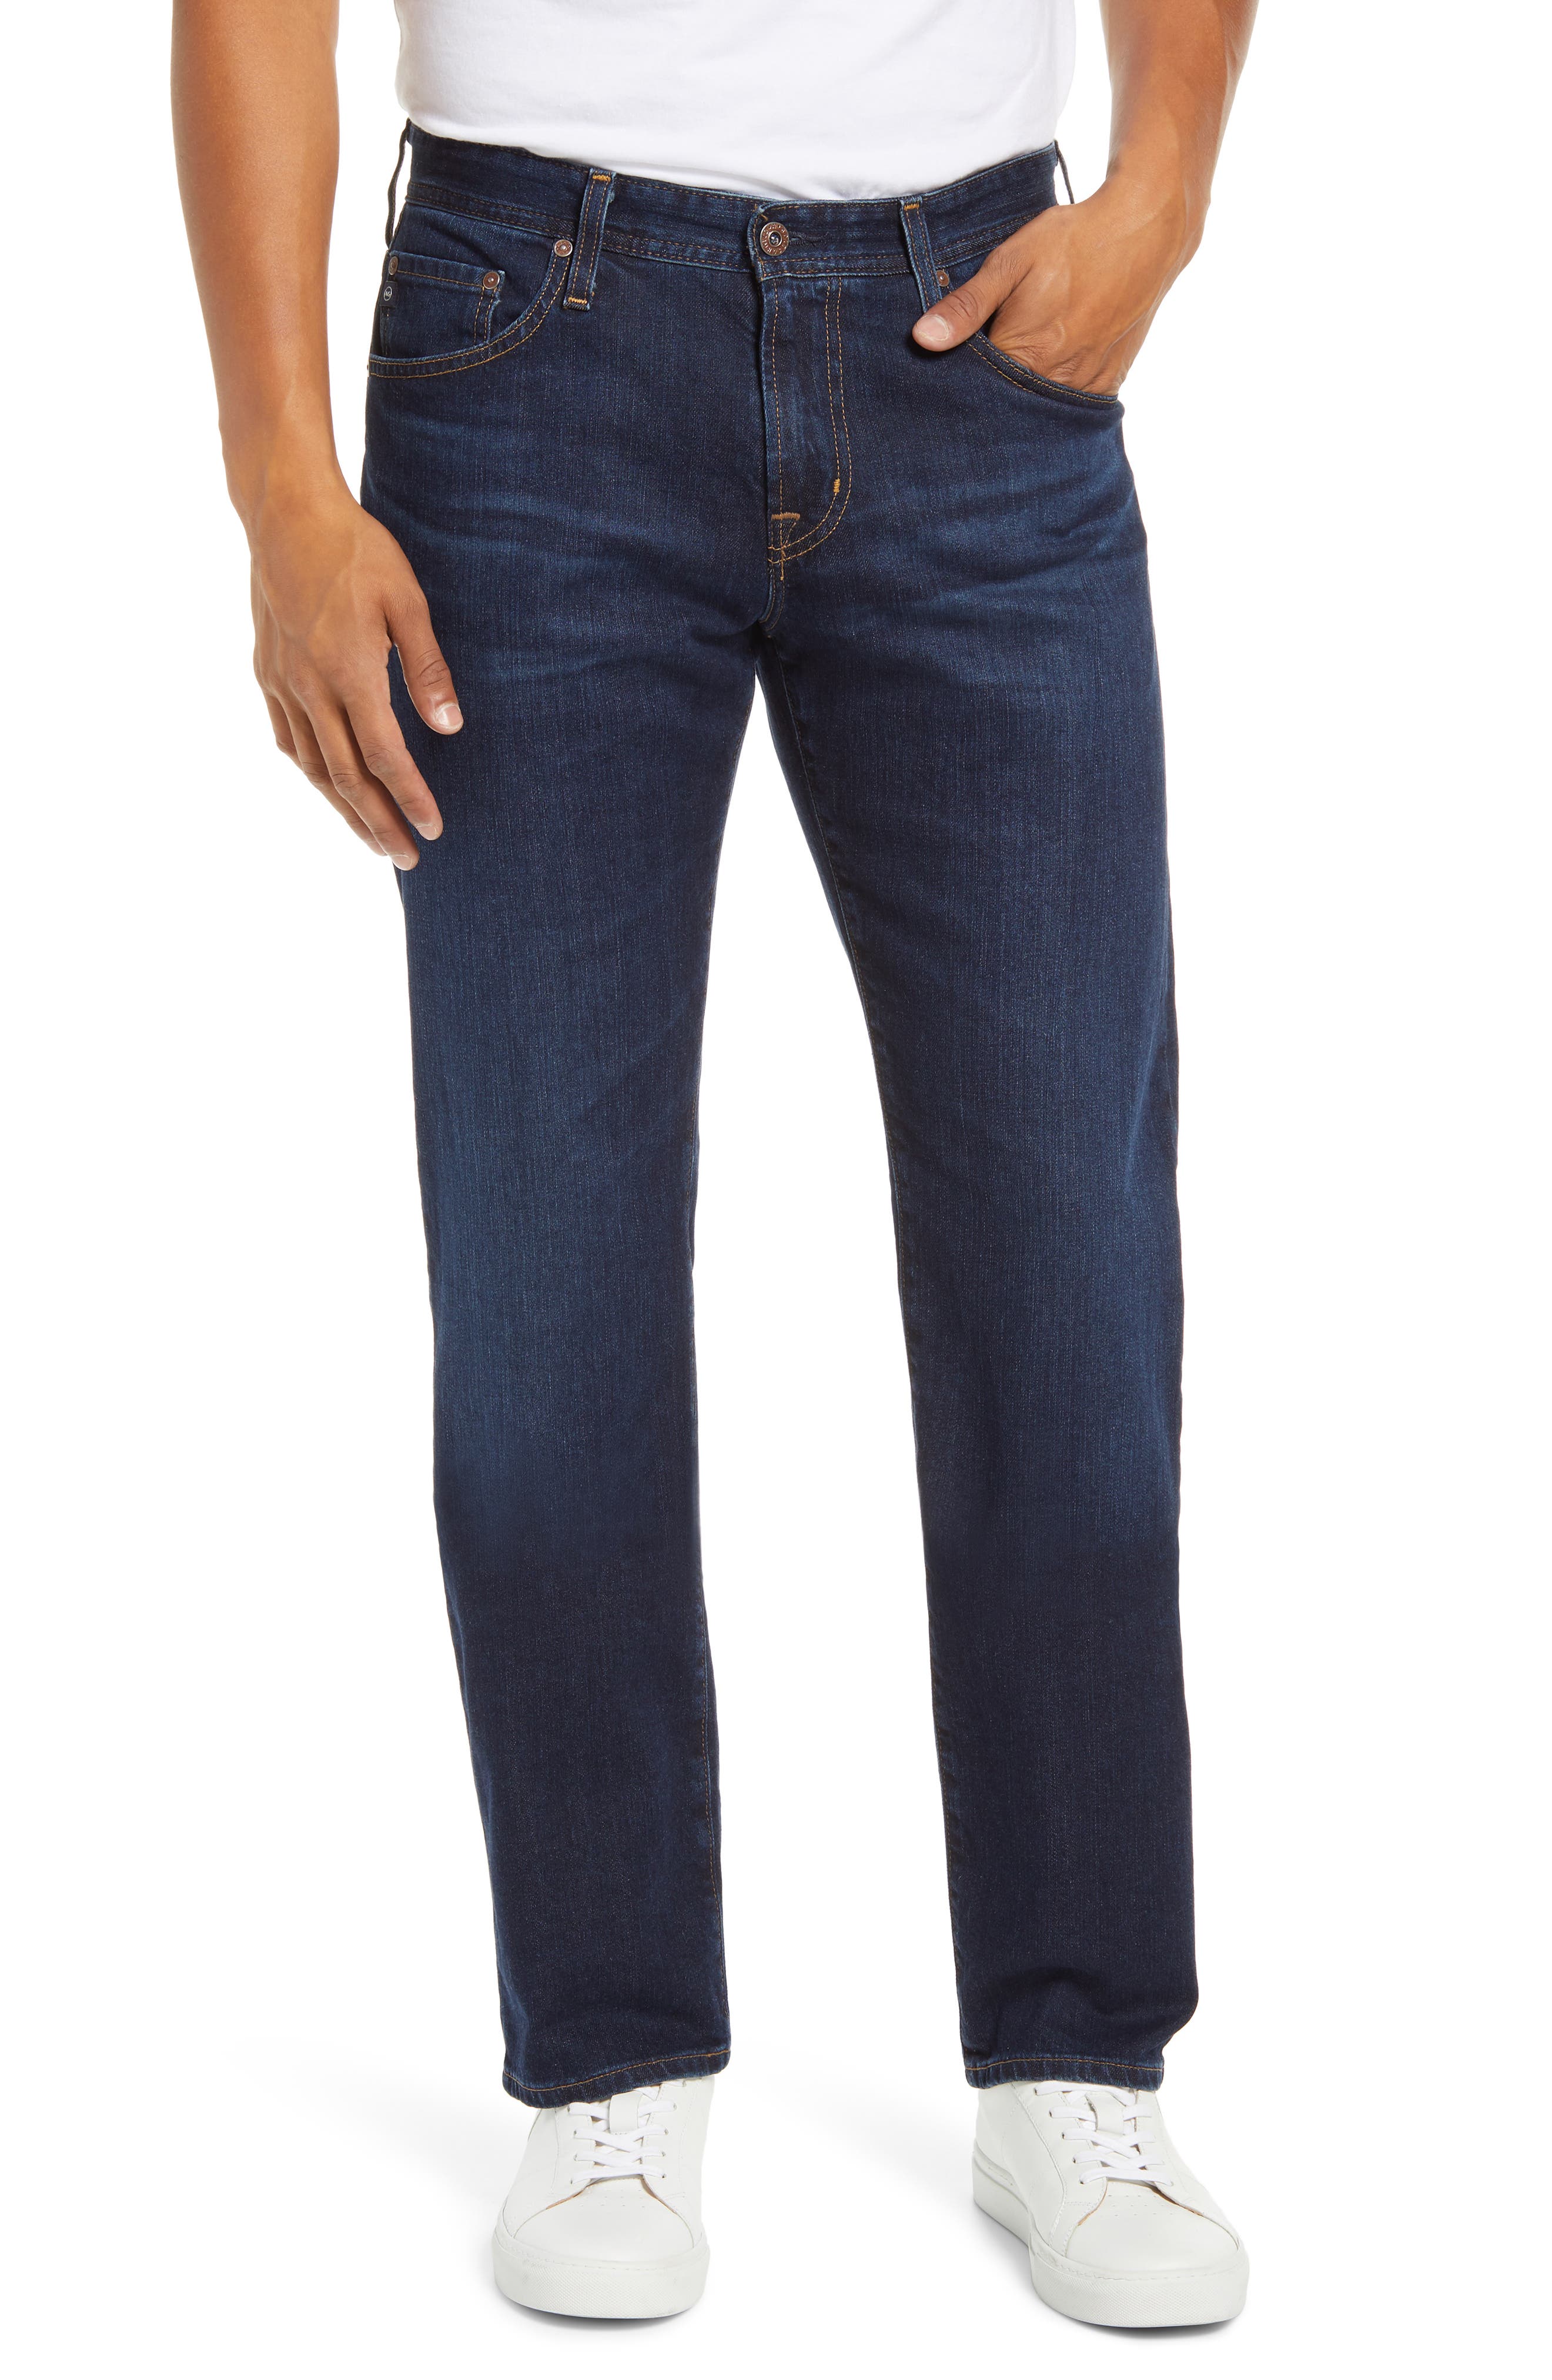 jeans at nordstrom